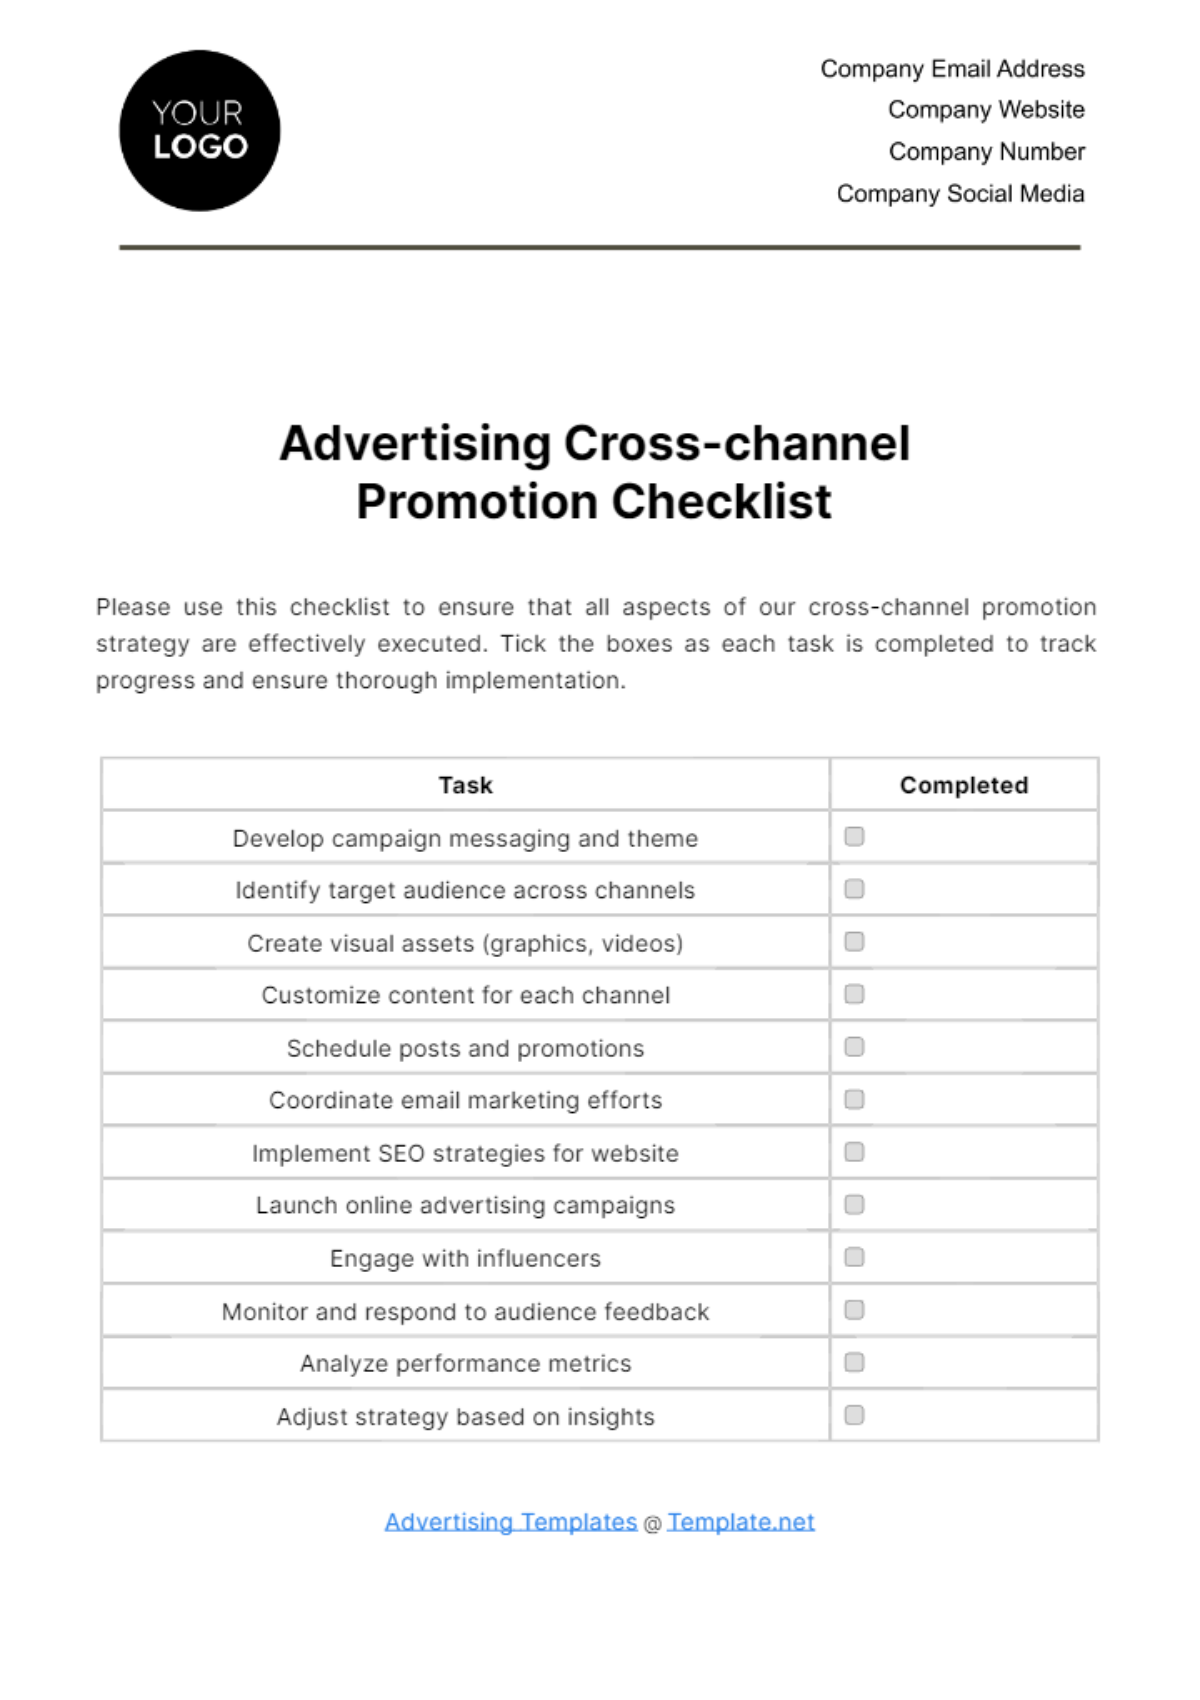 Free Advertising Cross-channel Promotion Checklist Template